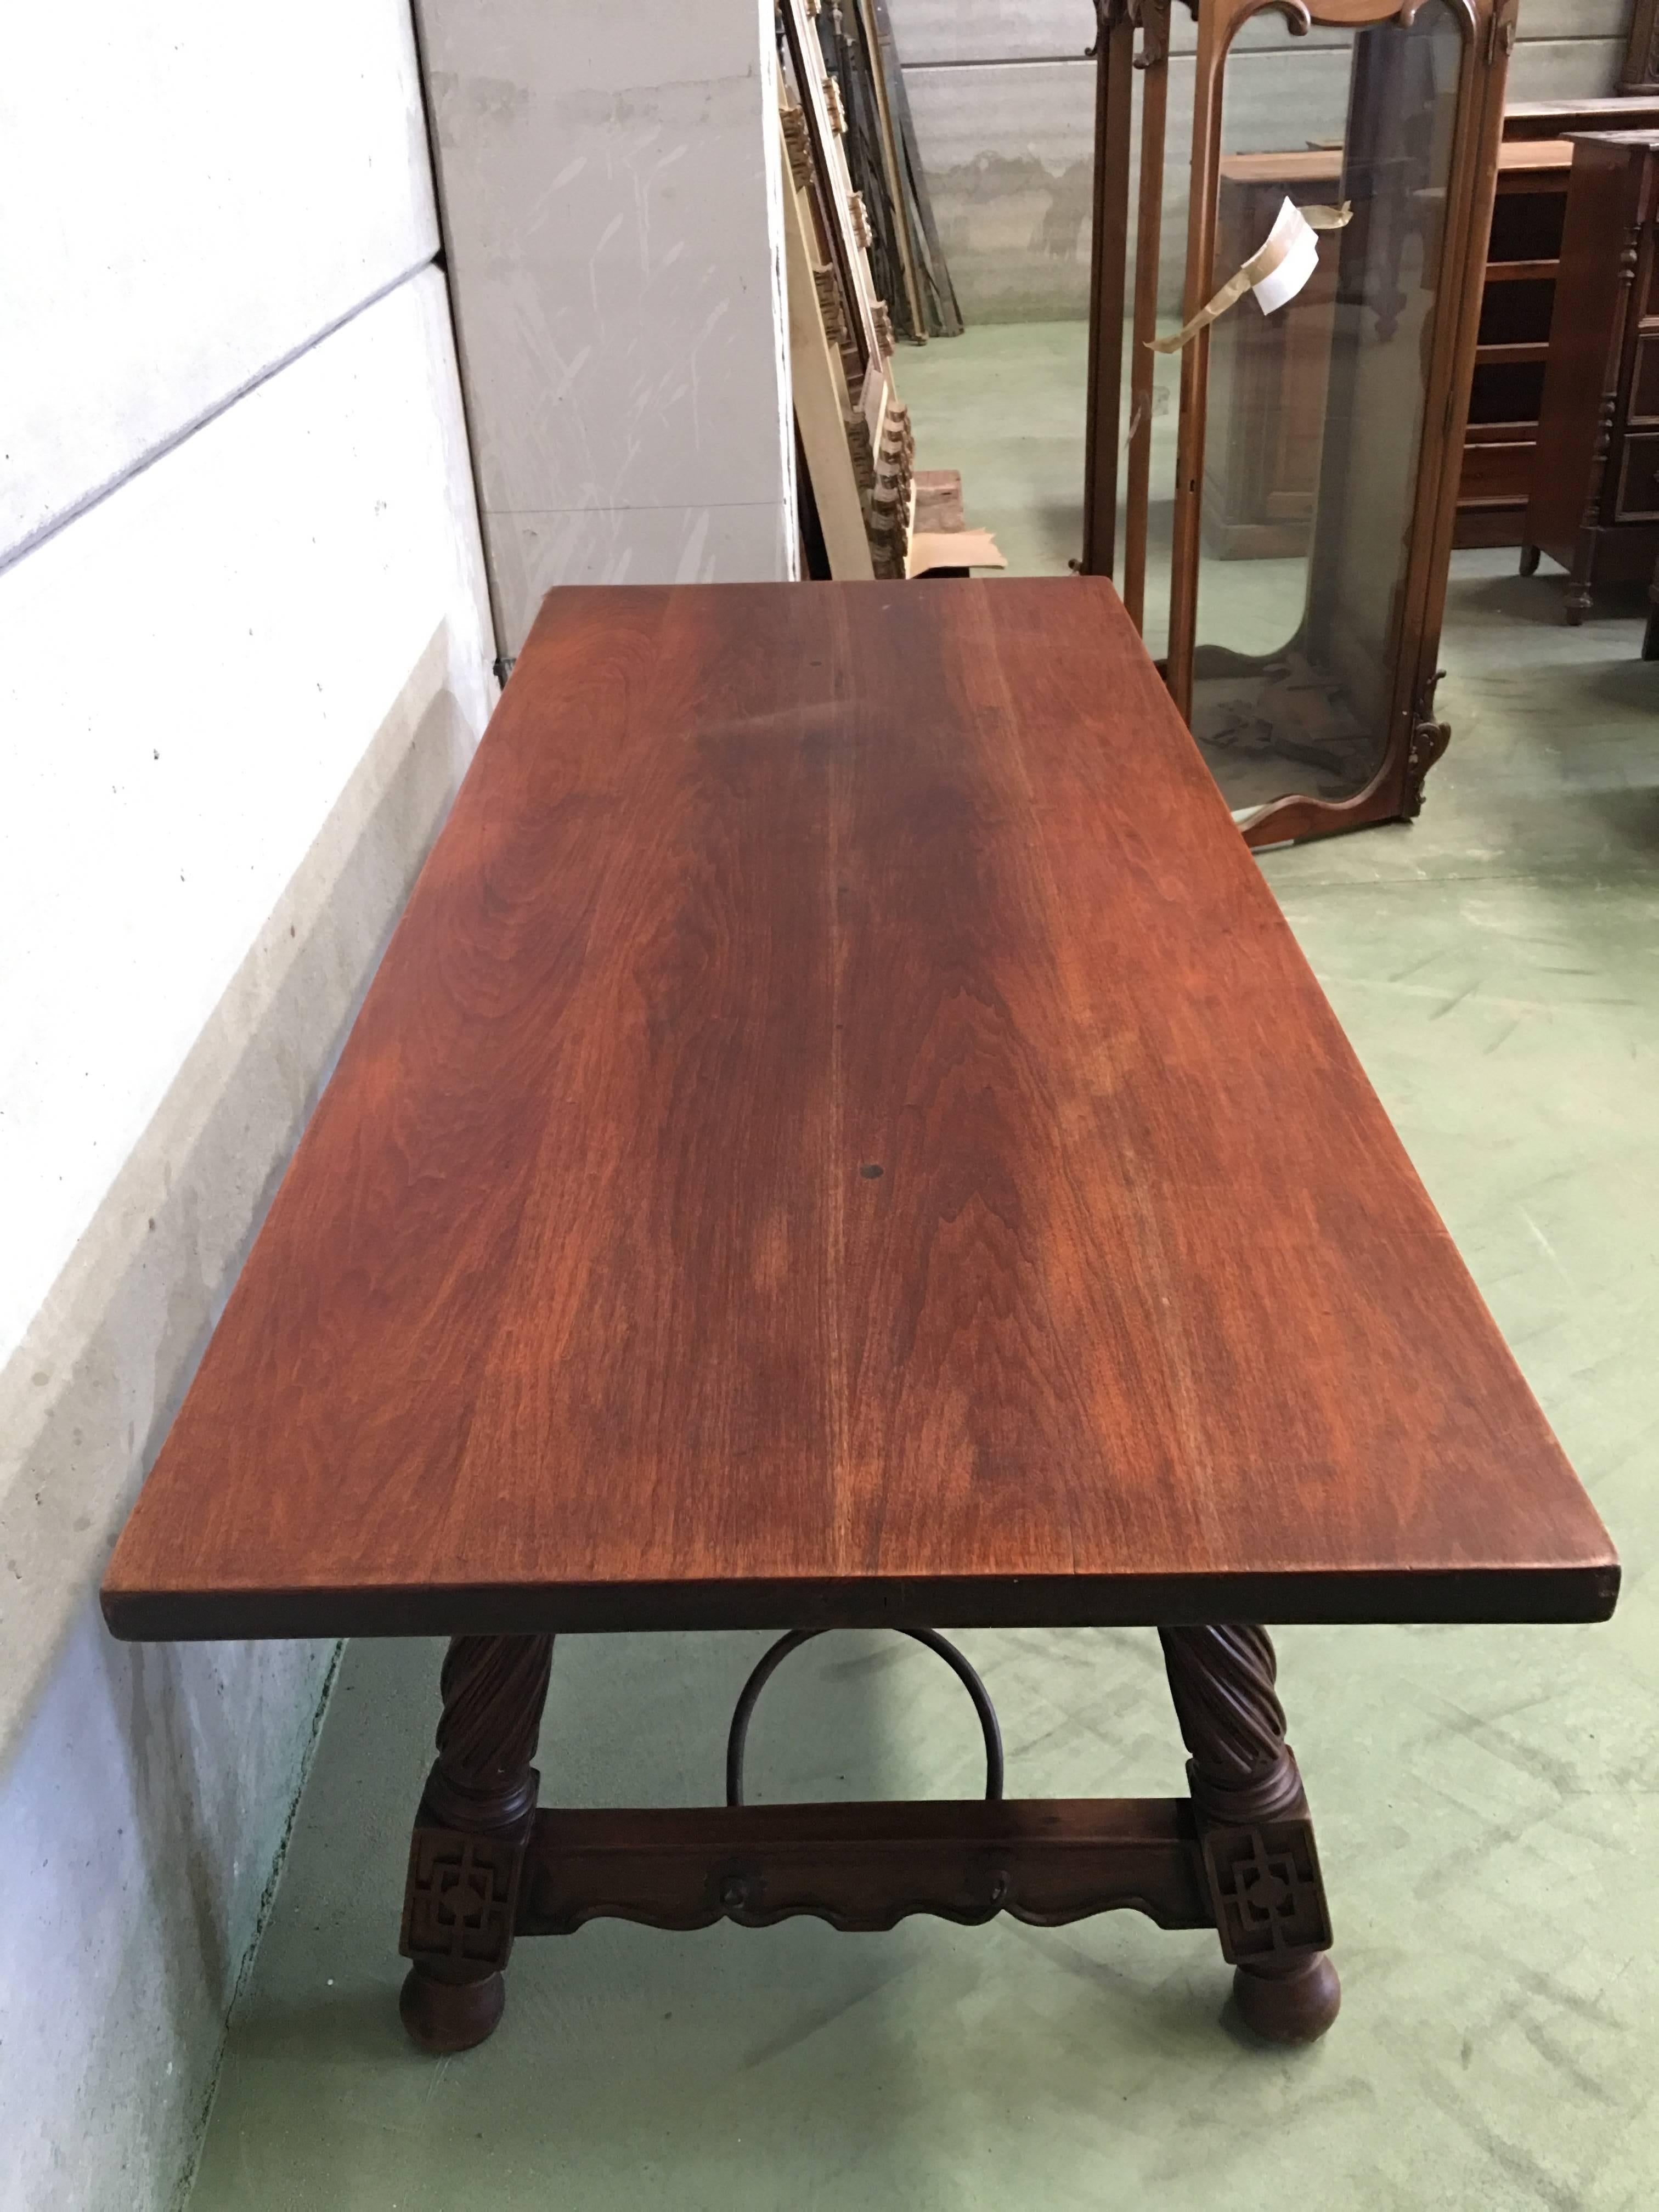 18th Spanish Refectory Desk Table with Solomonic Legs and Iron Stretcher 2